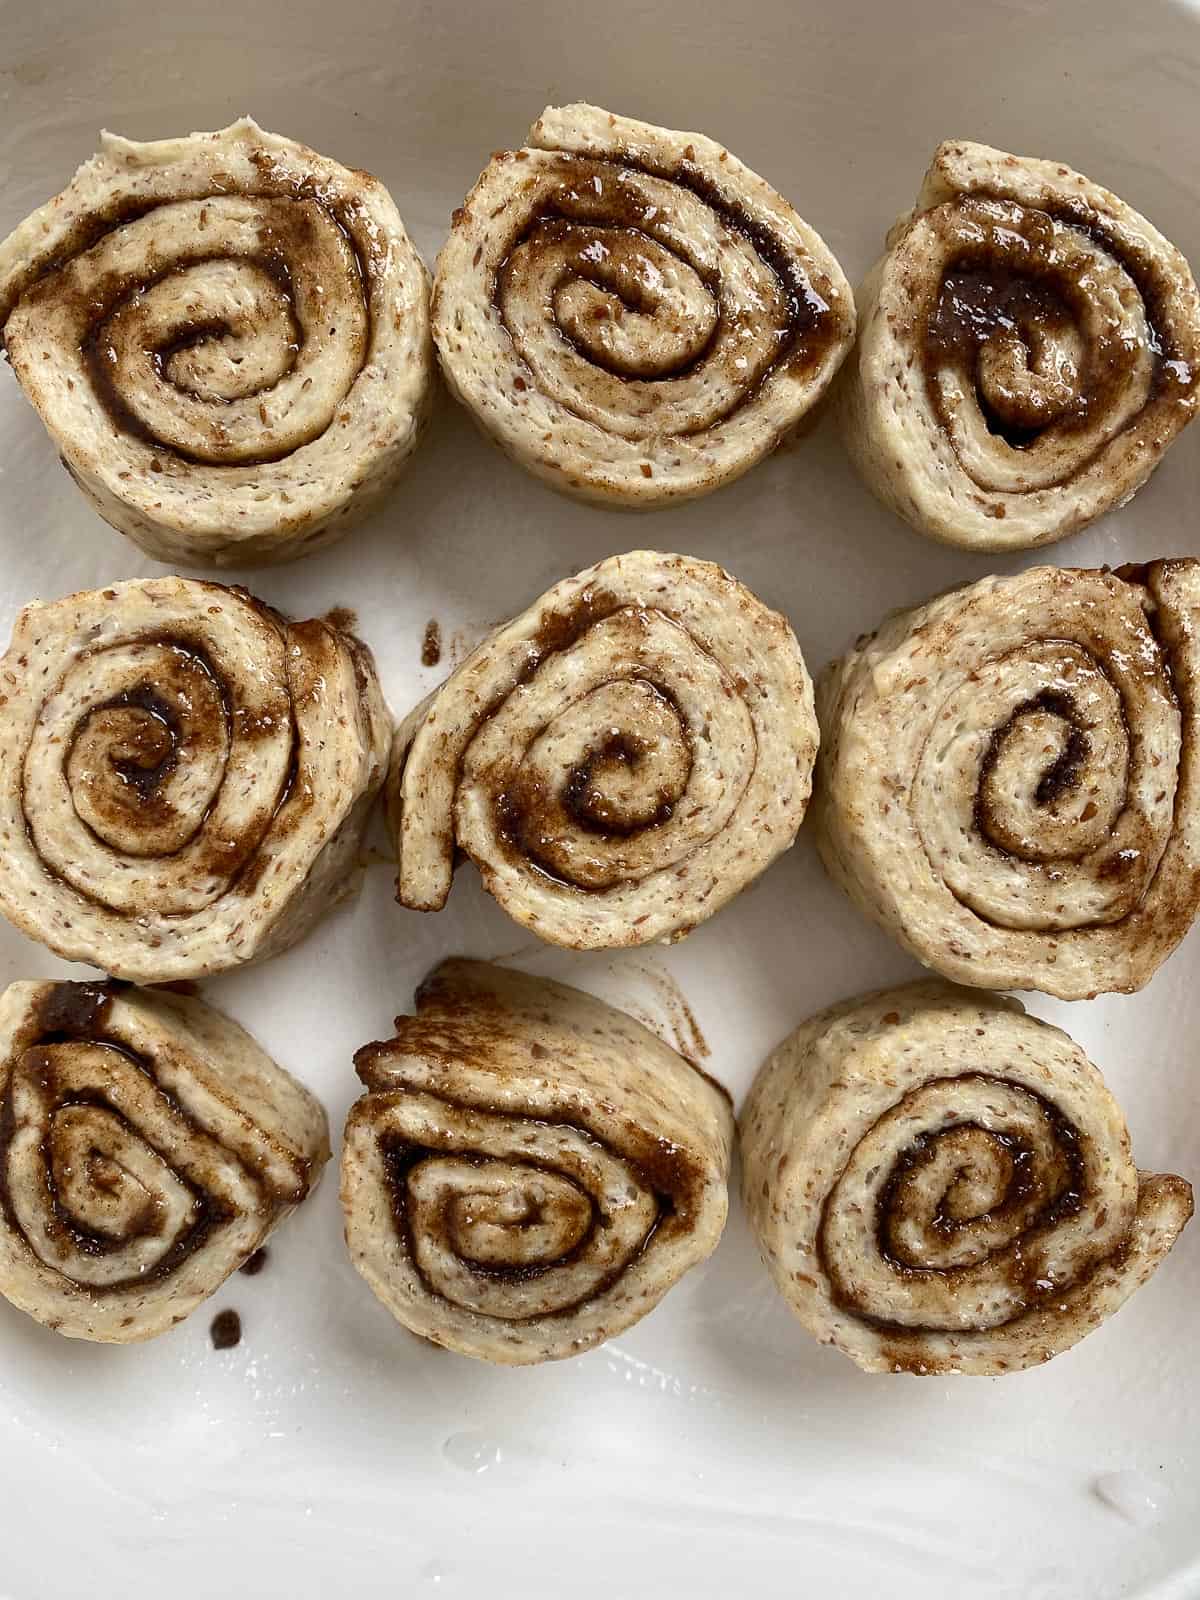 rolled up cinnamon dough pieces on a white surface